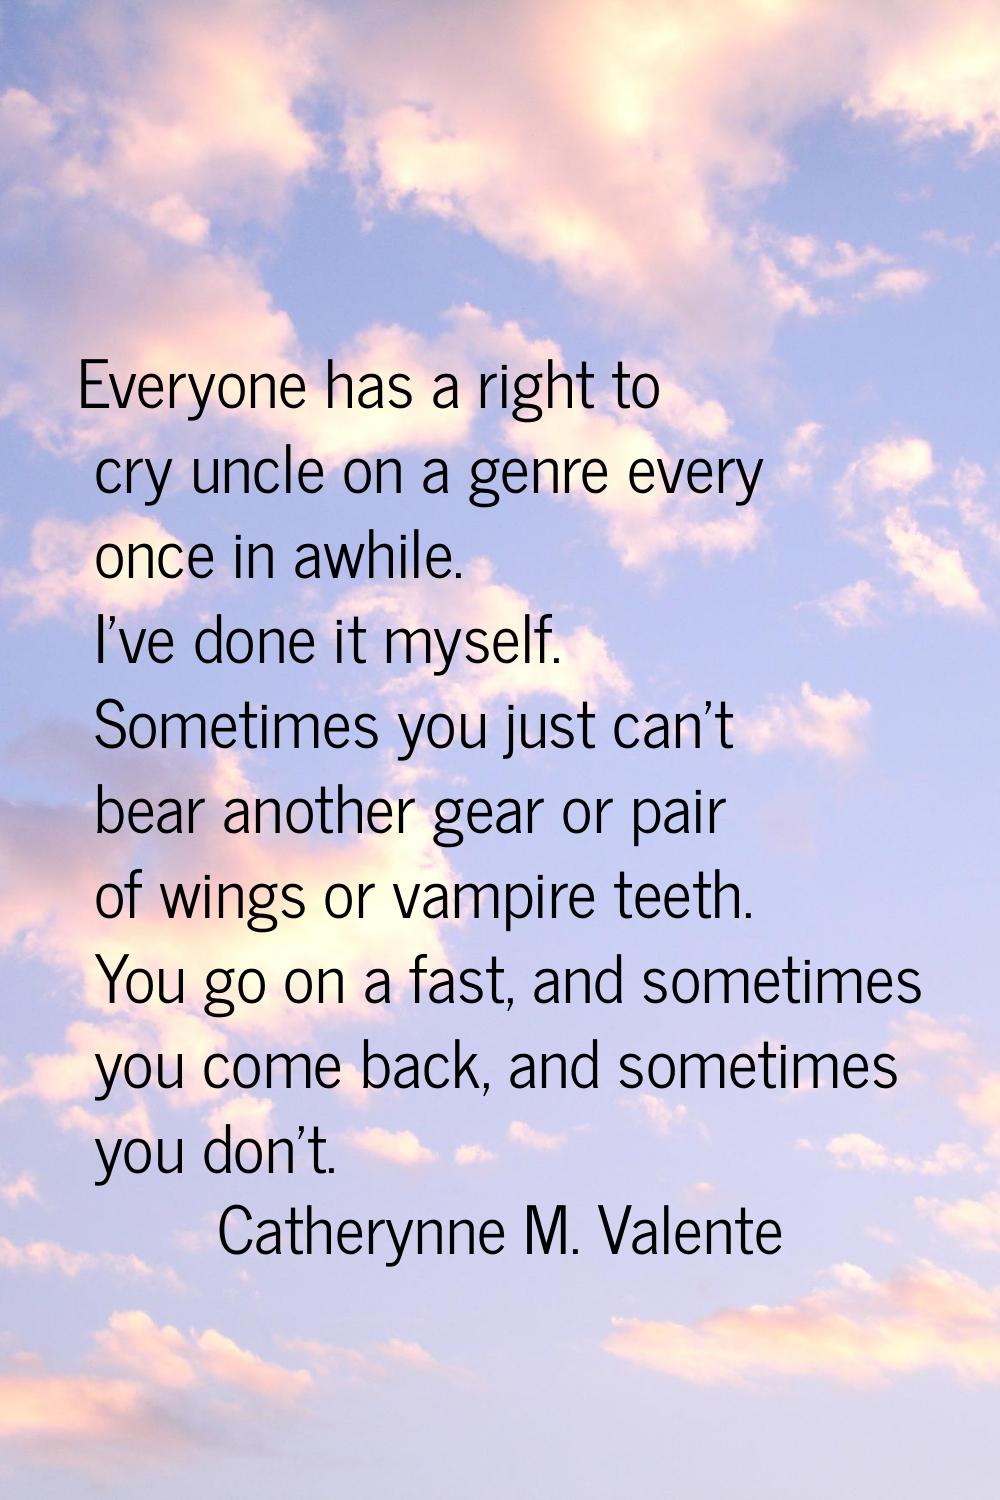 Everyone has a right to cry uncle on a genre every once in awhile. I've done it myself. Sometimes y